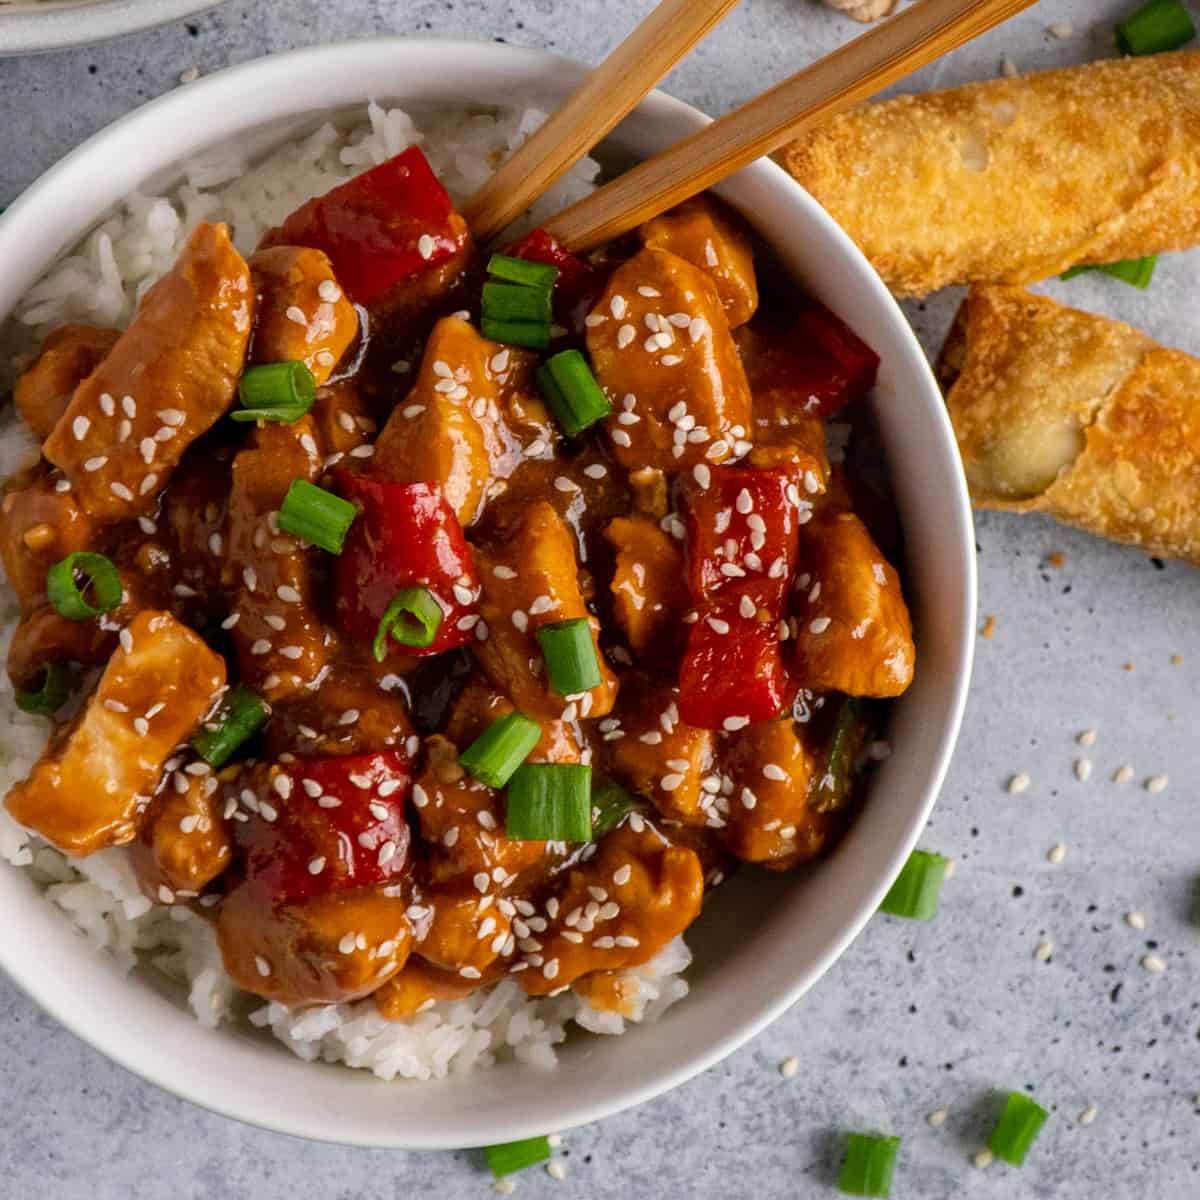 Sesame chicken over a bowl of rice garnished with green onions